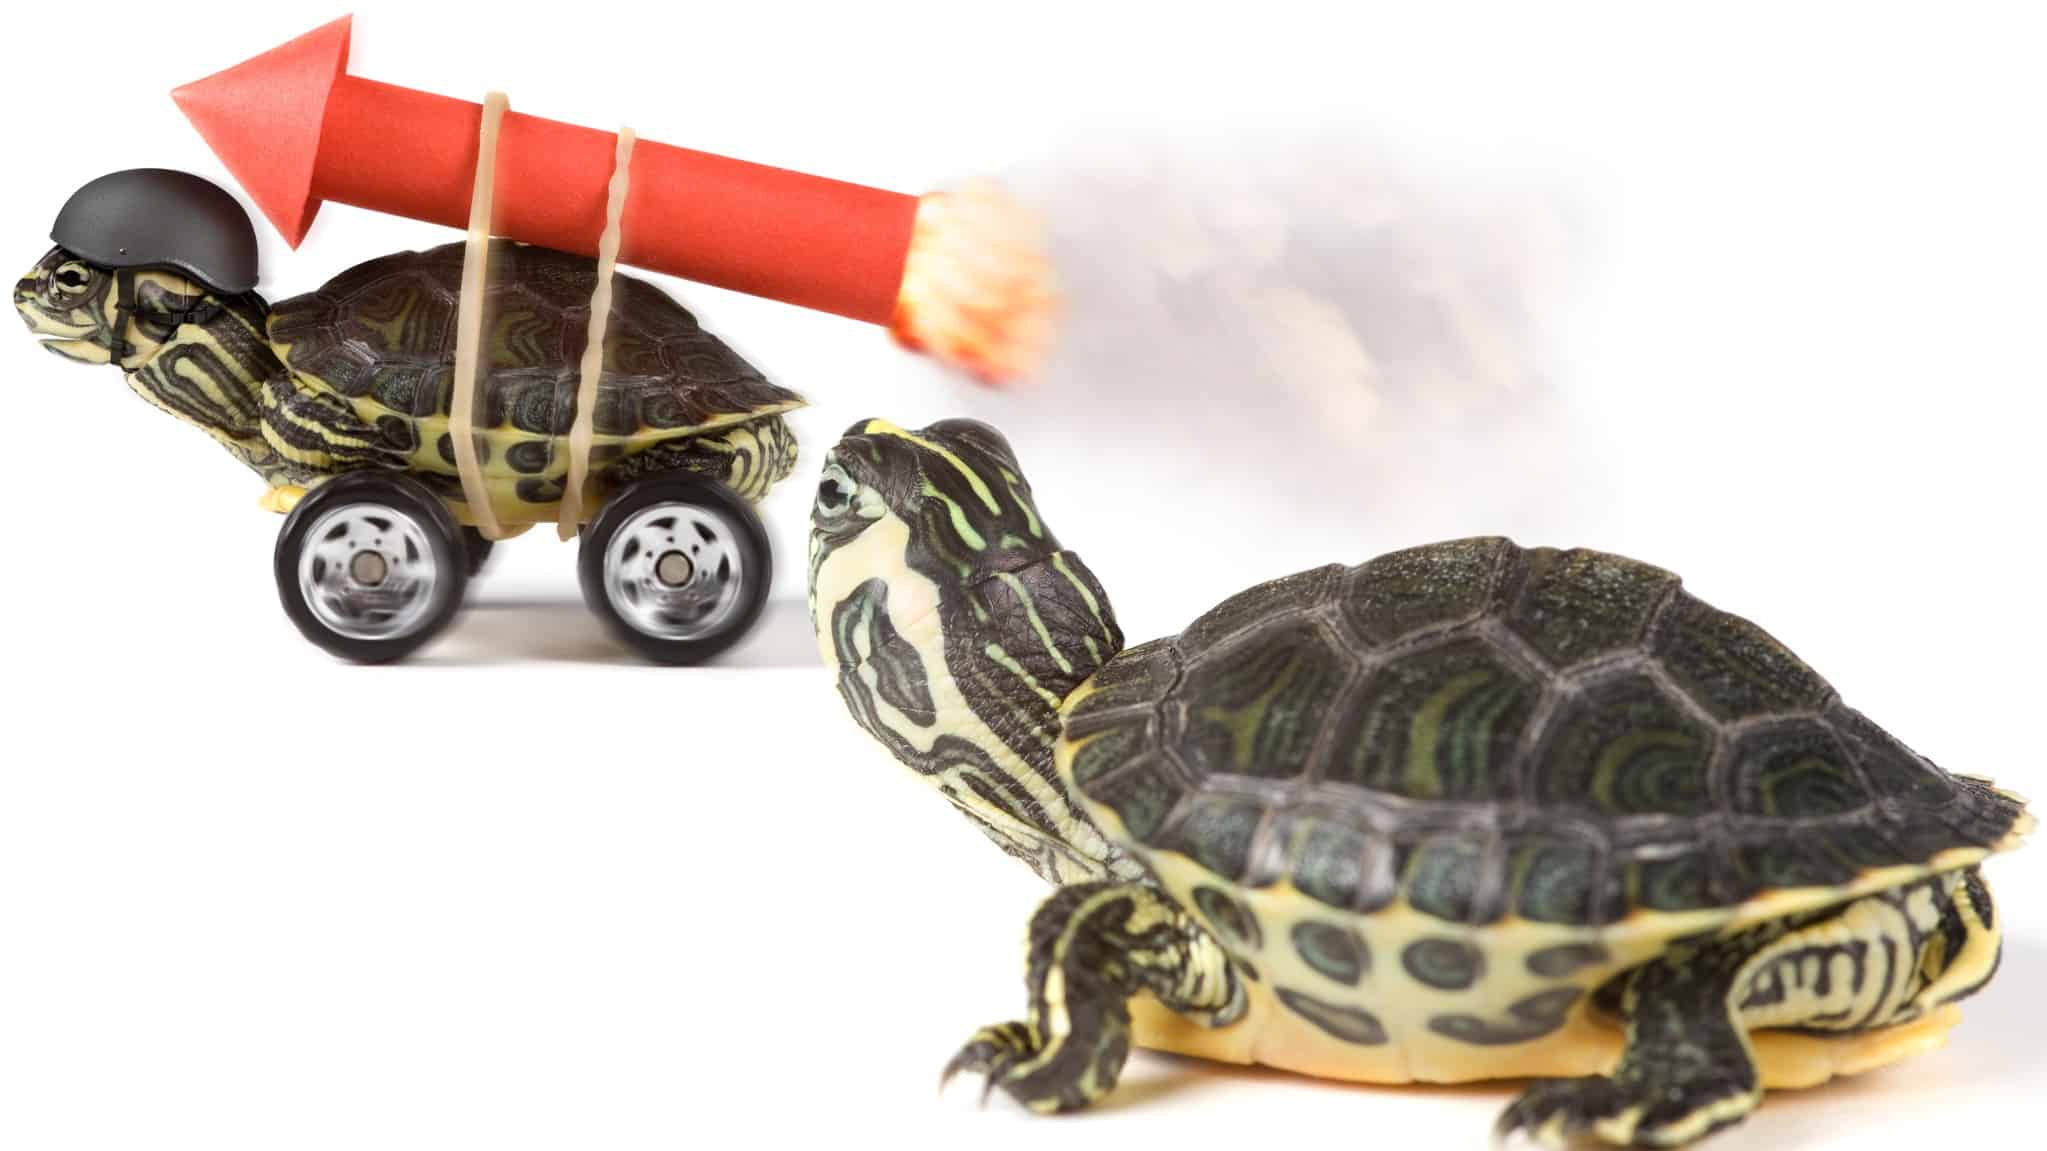 Tortoise with rocket strapped to back in front while another tortoise lags behind